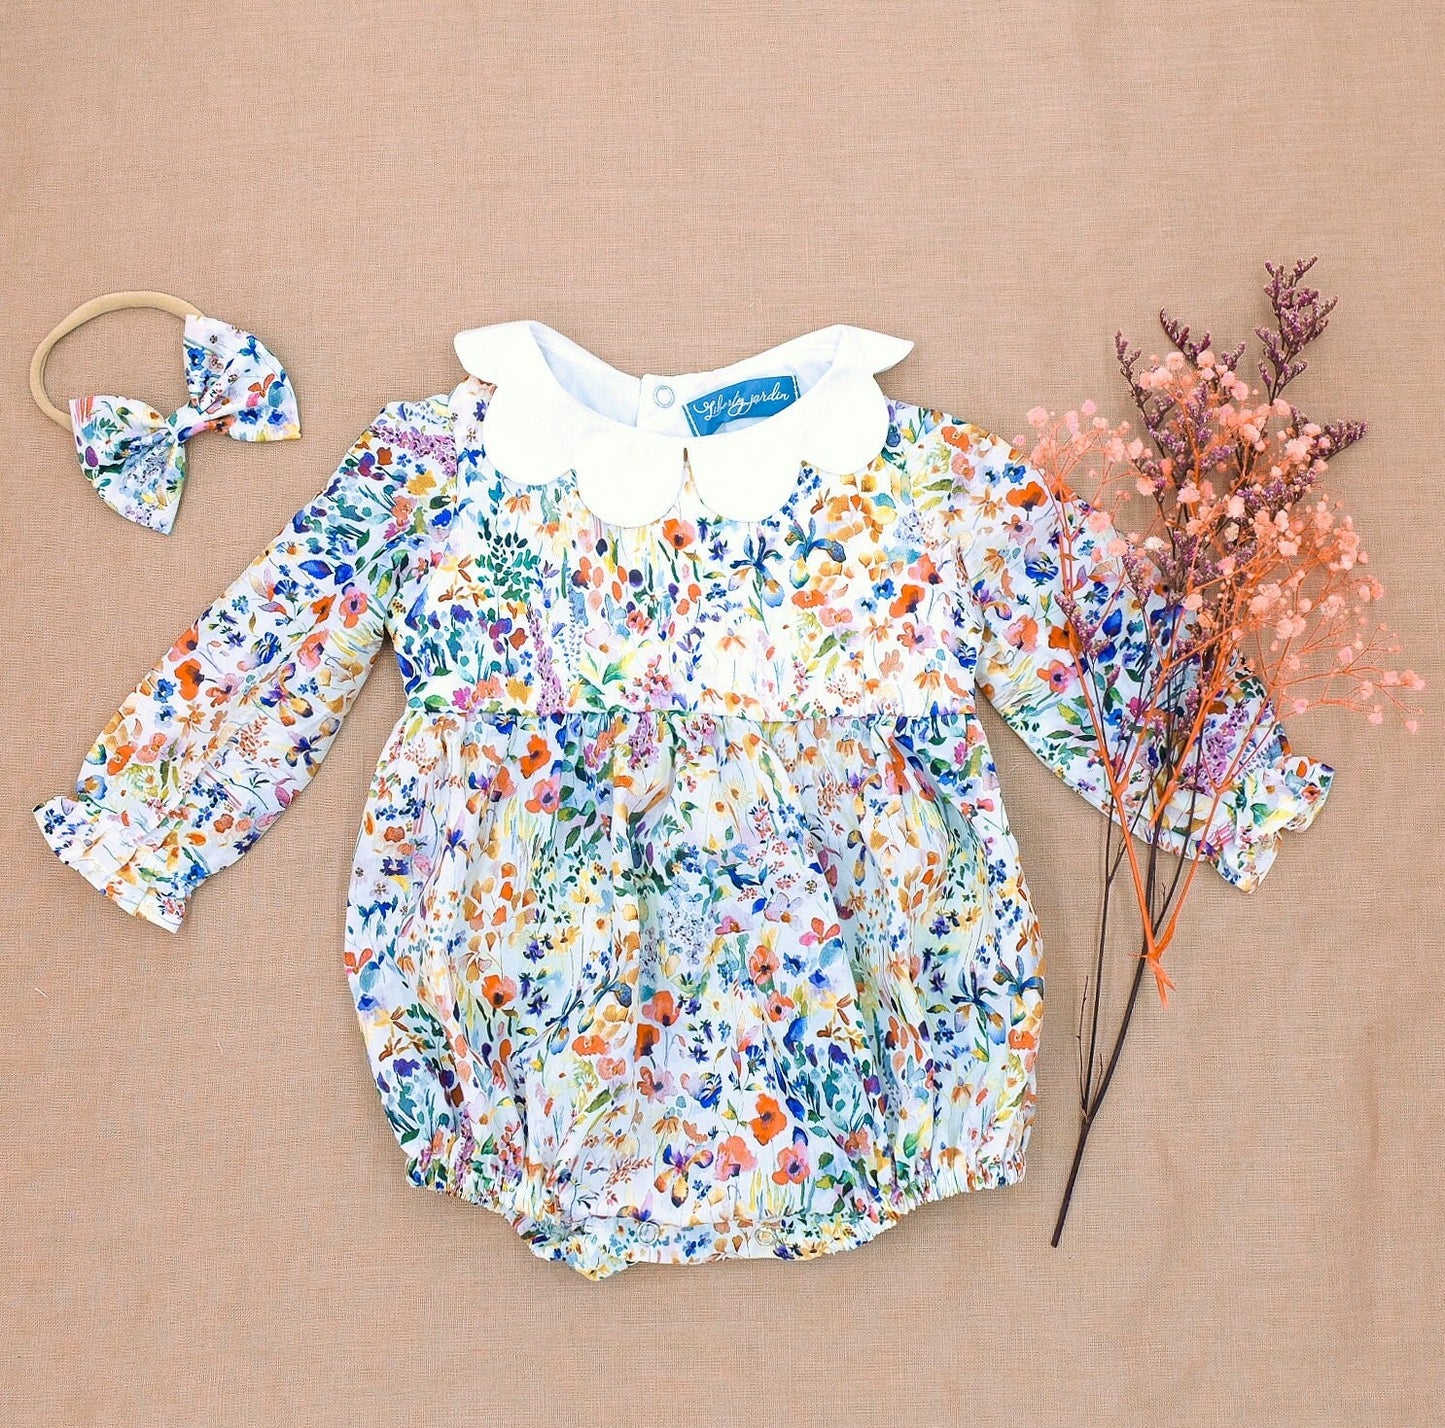 Liberty London baby m and m bubble romper organic cotton, floral animal print, wedding baptism christening outfits first birthday long short sleeves sleeveless, eastern thanksgiving halloween Christmas new born ruffle Peter Pan scalloped petal collar